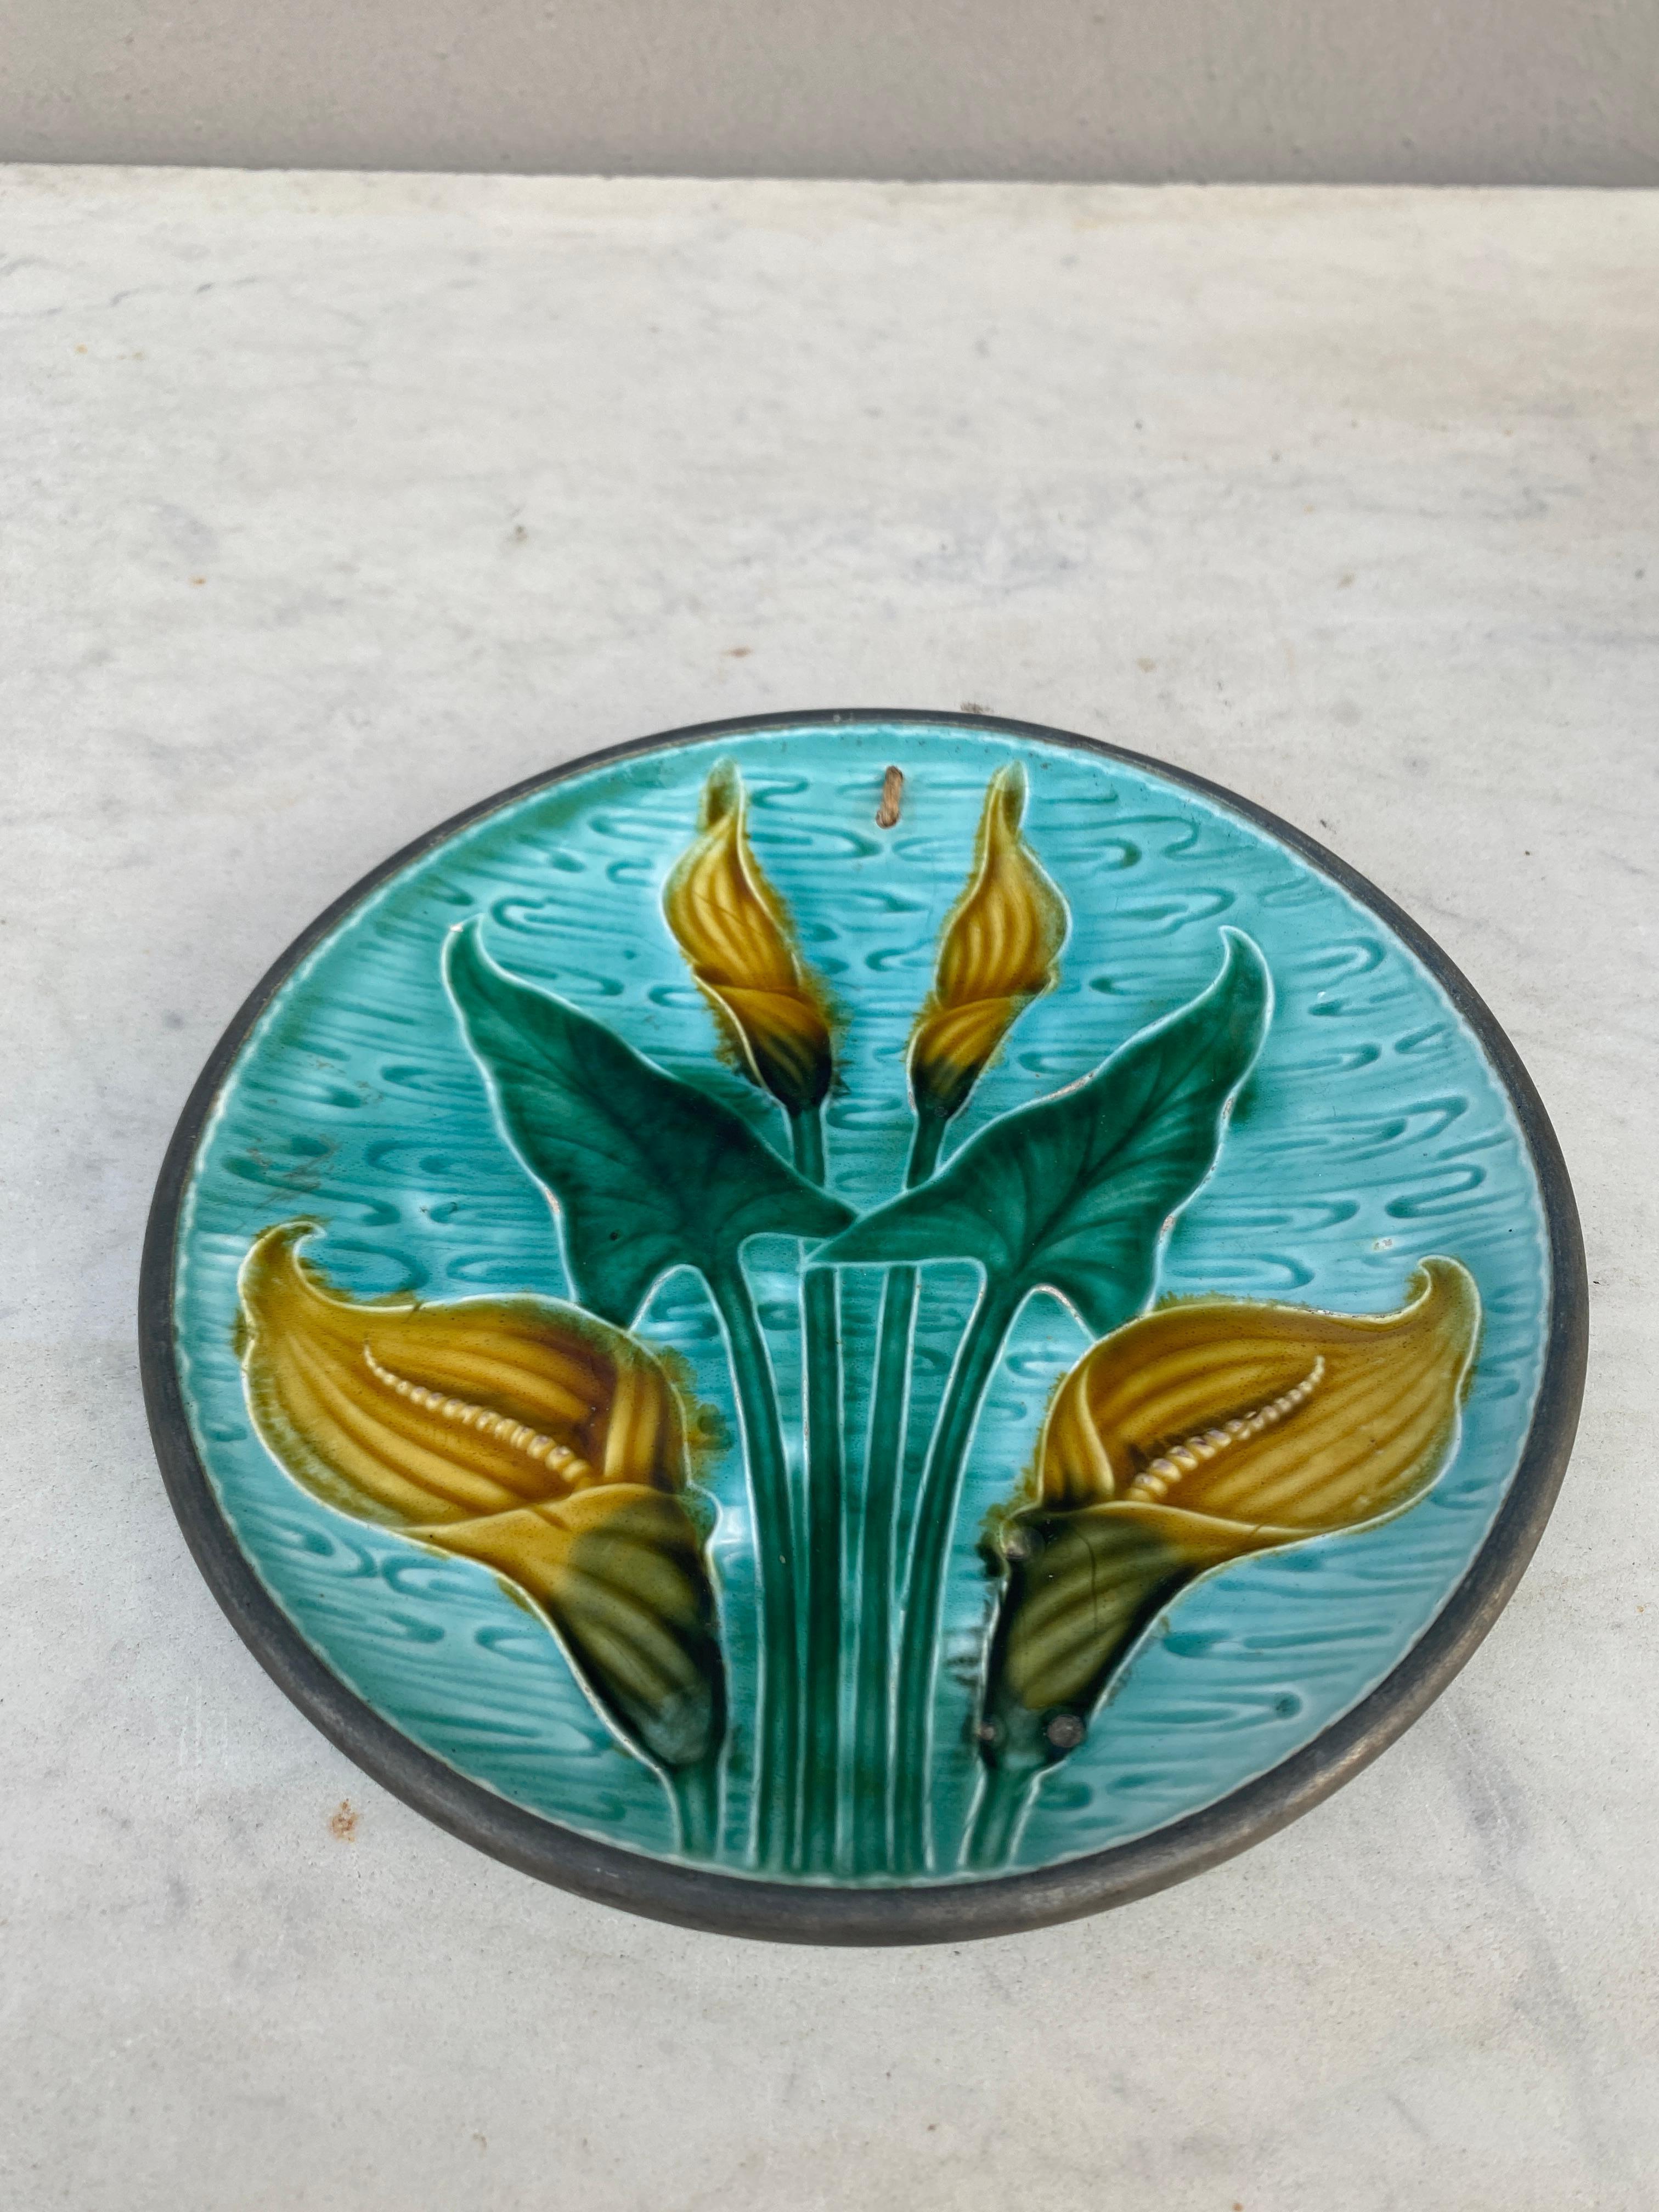 French Majolica arum plate circa 1900 unsigned.
The plate have a metal border.